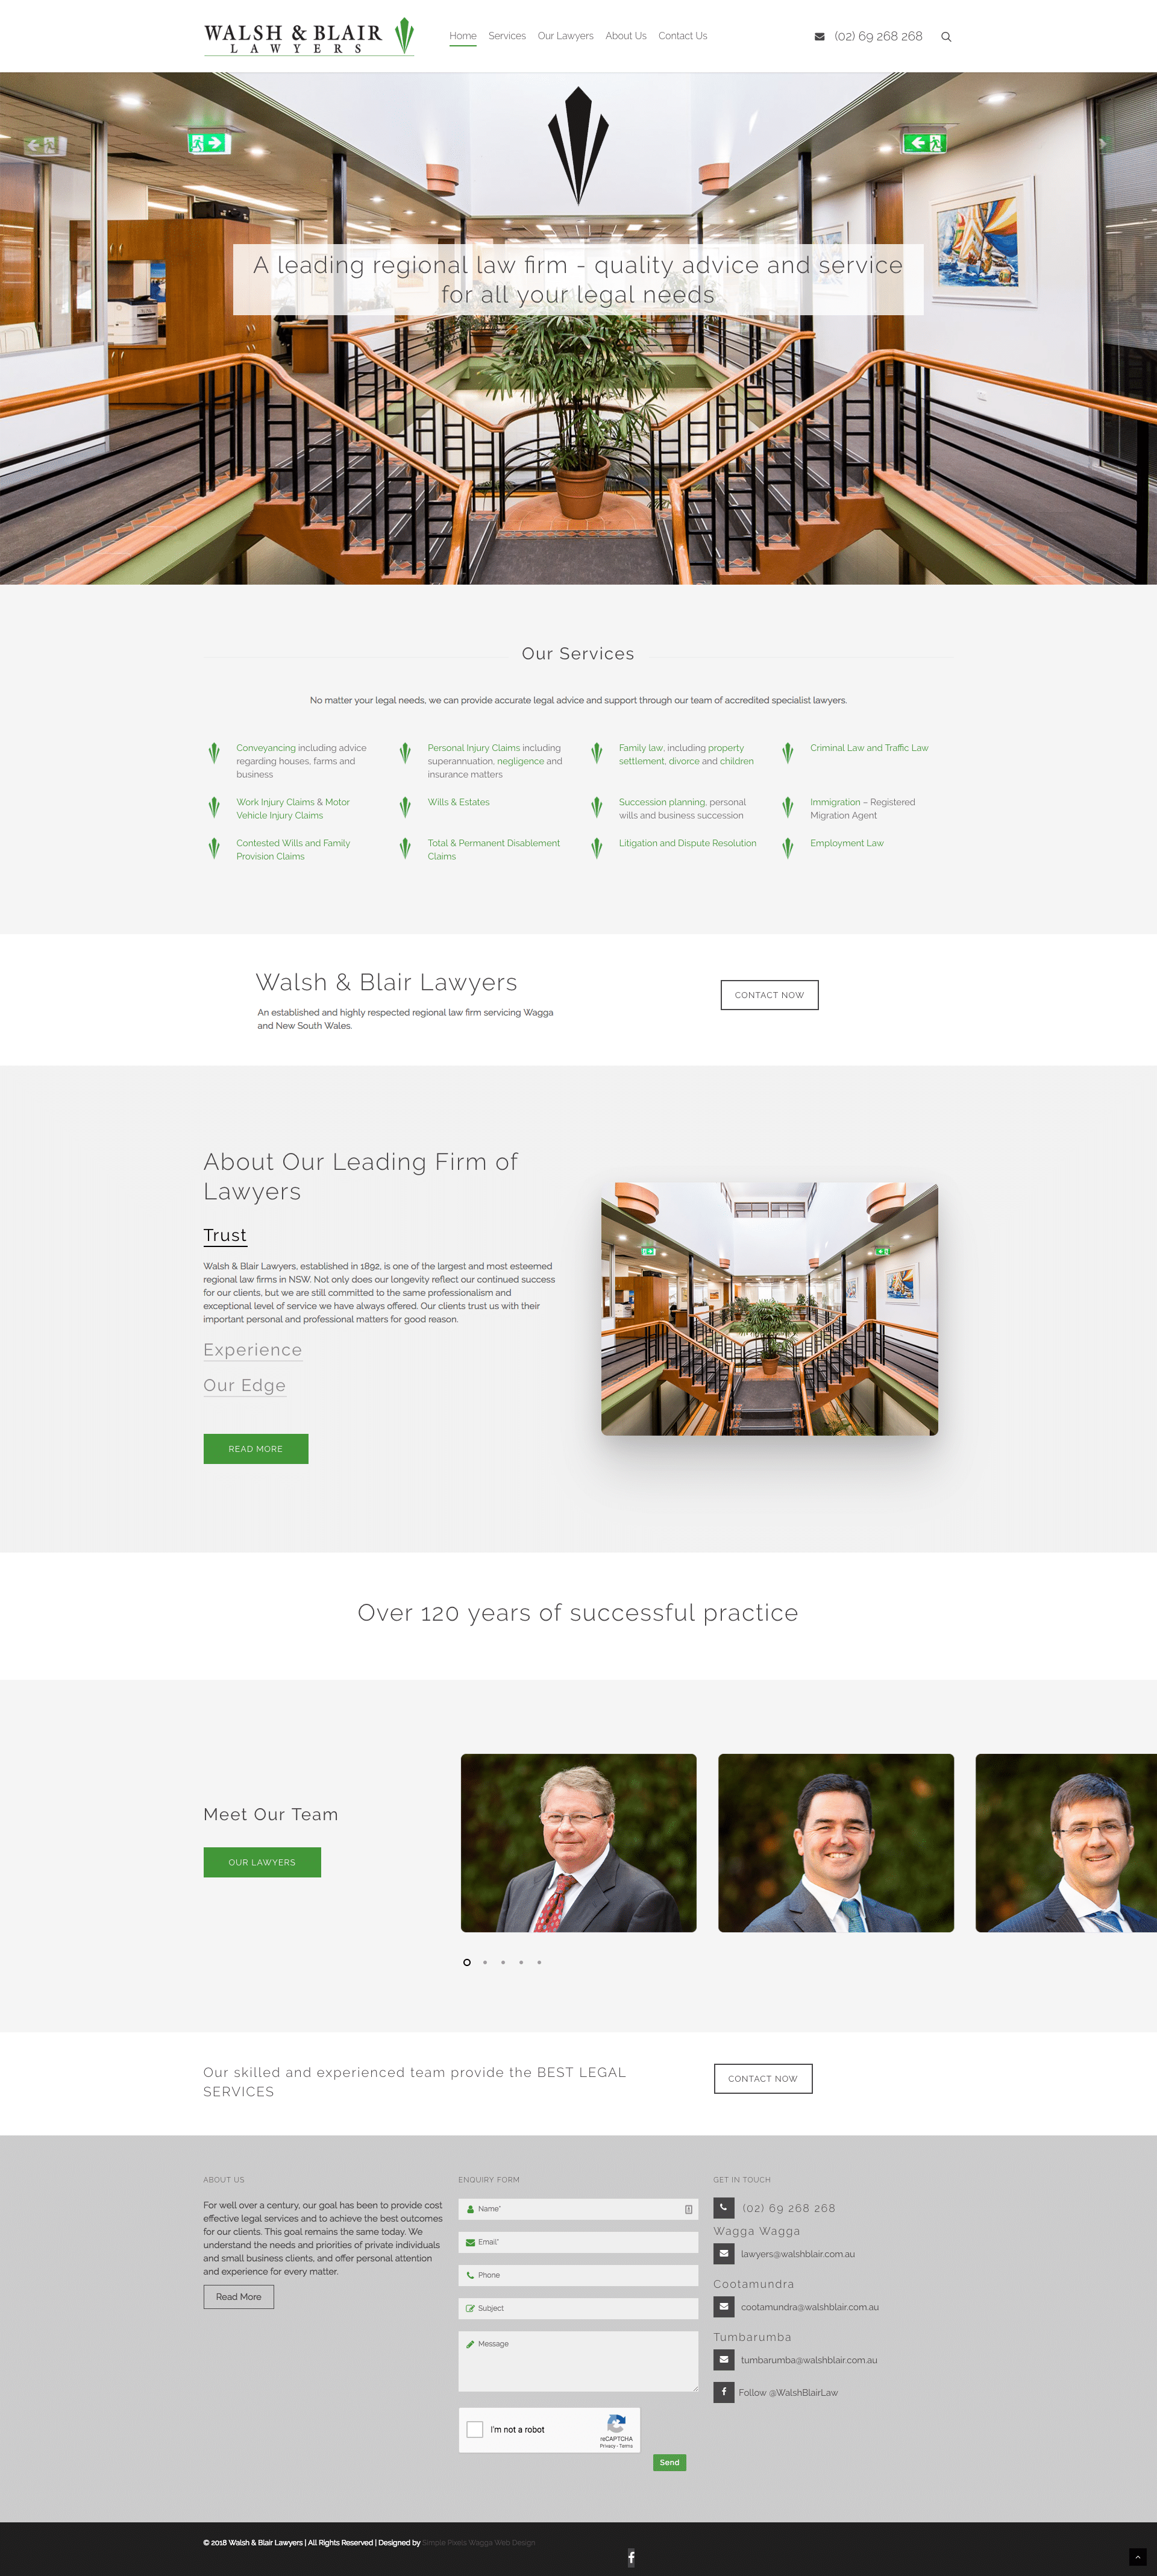 walsh and blair website design